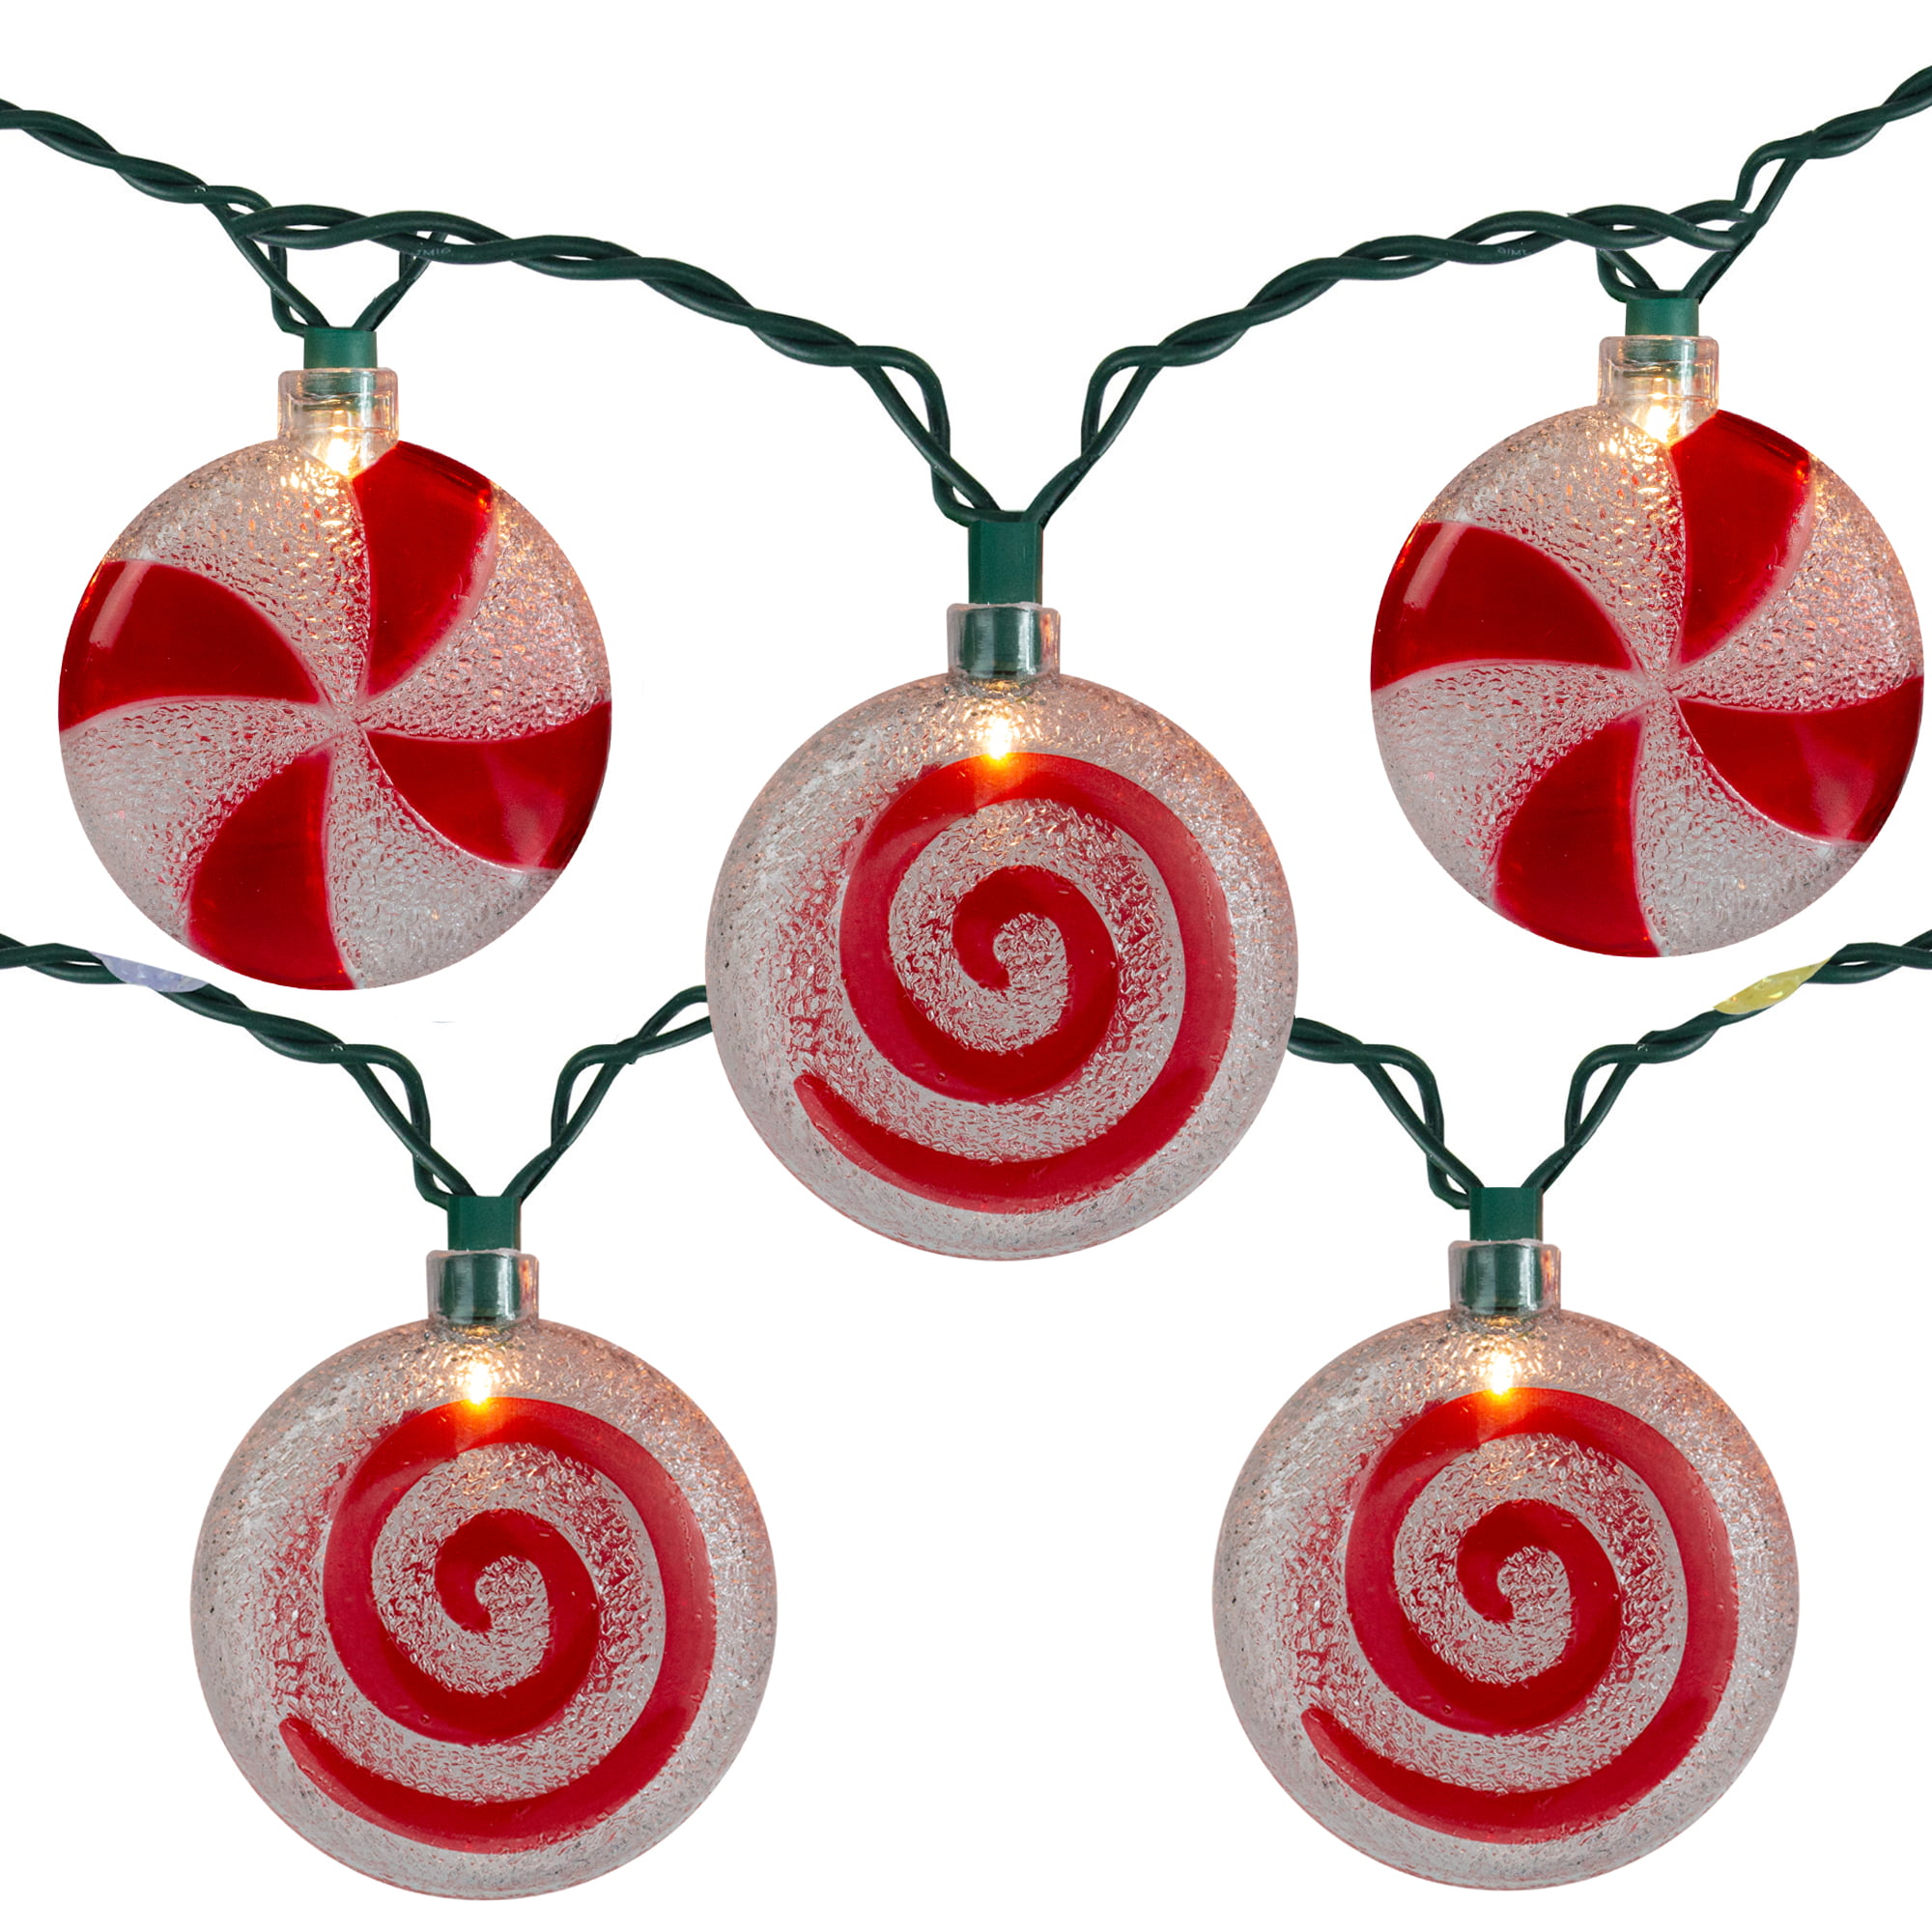 PEPPERMINT CANDY CHRISTMAS LIGHTS 10 Ct CANDY WREATH TREE CANDY DECOR 